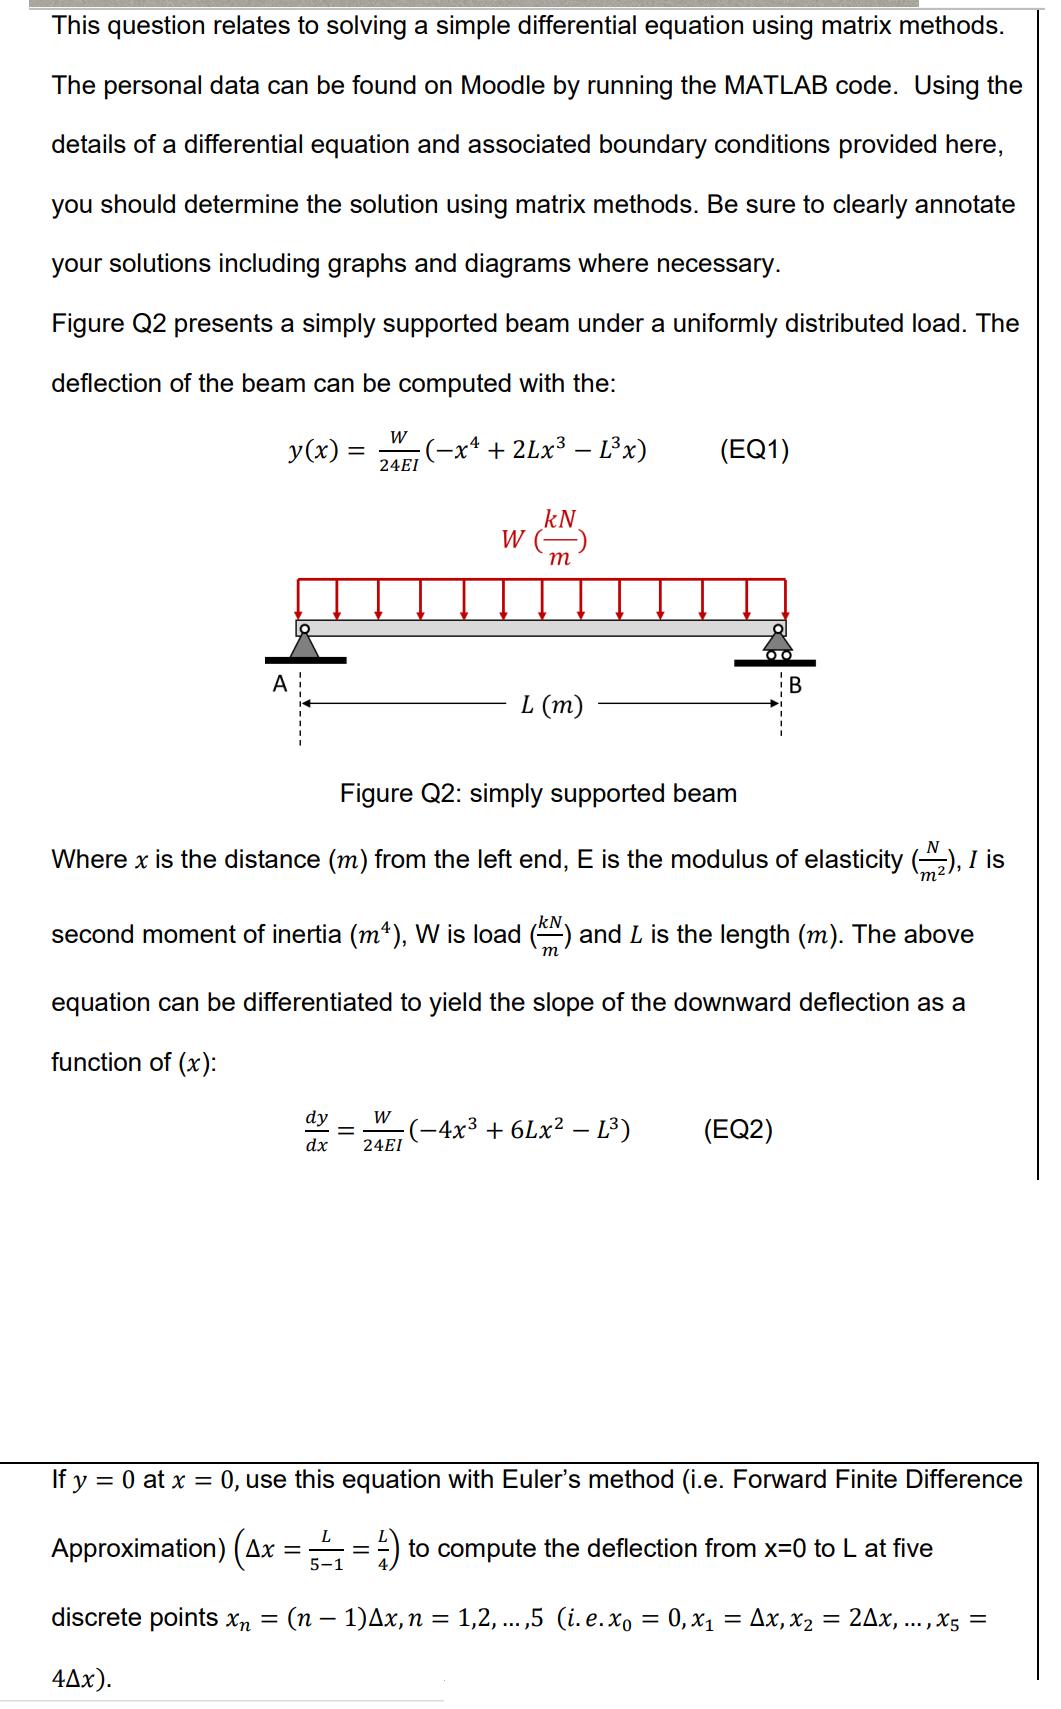 This question relates to solving a simple differential equation using matrix methods. The personal data can